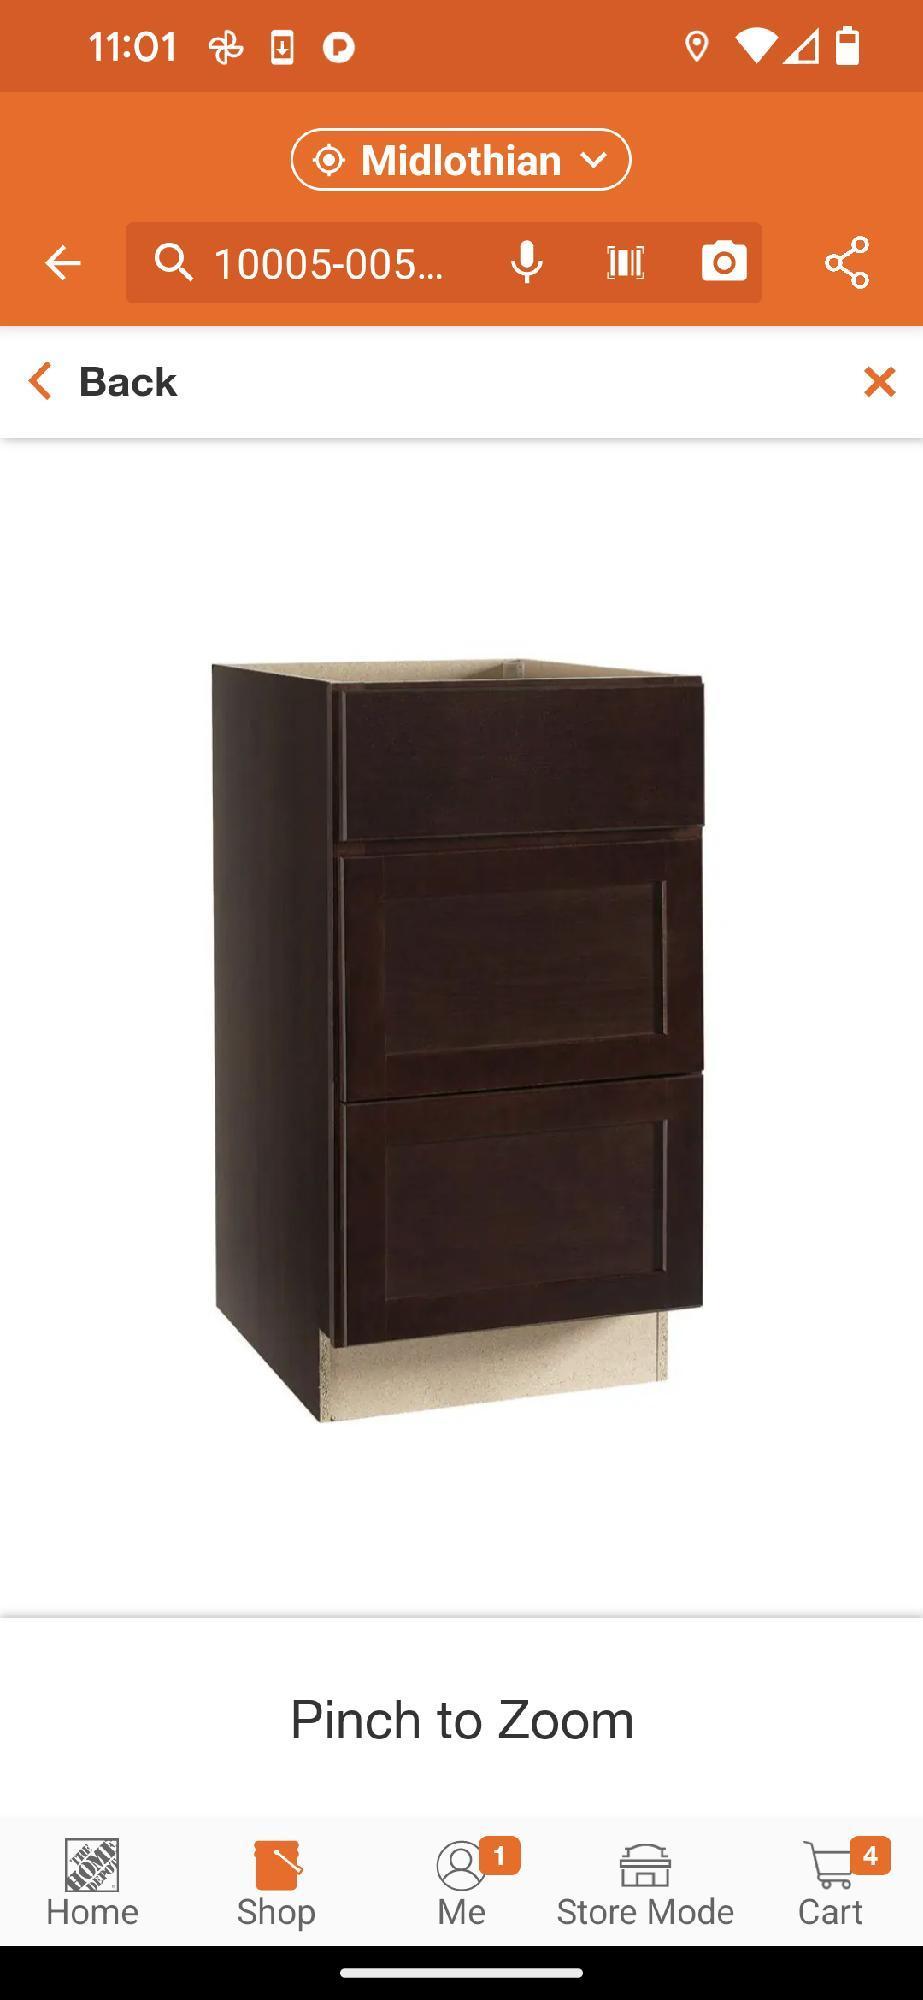 (I Removed Bands For Better Look At Item) Hampton Bay Shaker 18 in. W x 24 in. D x 34.5 in. H